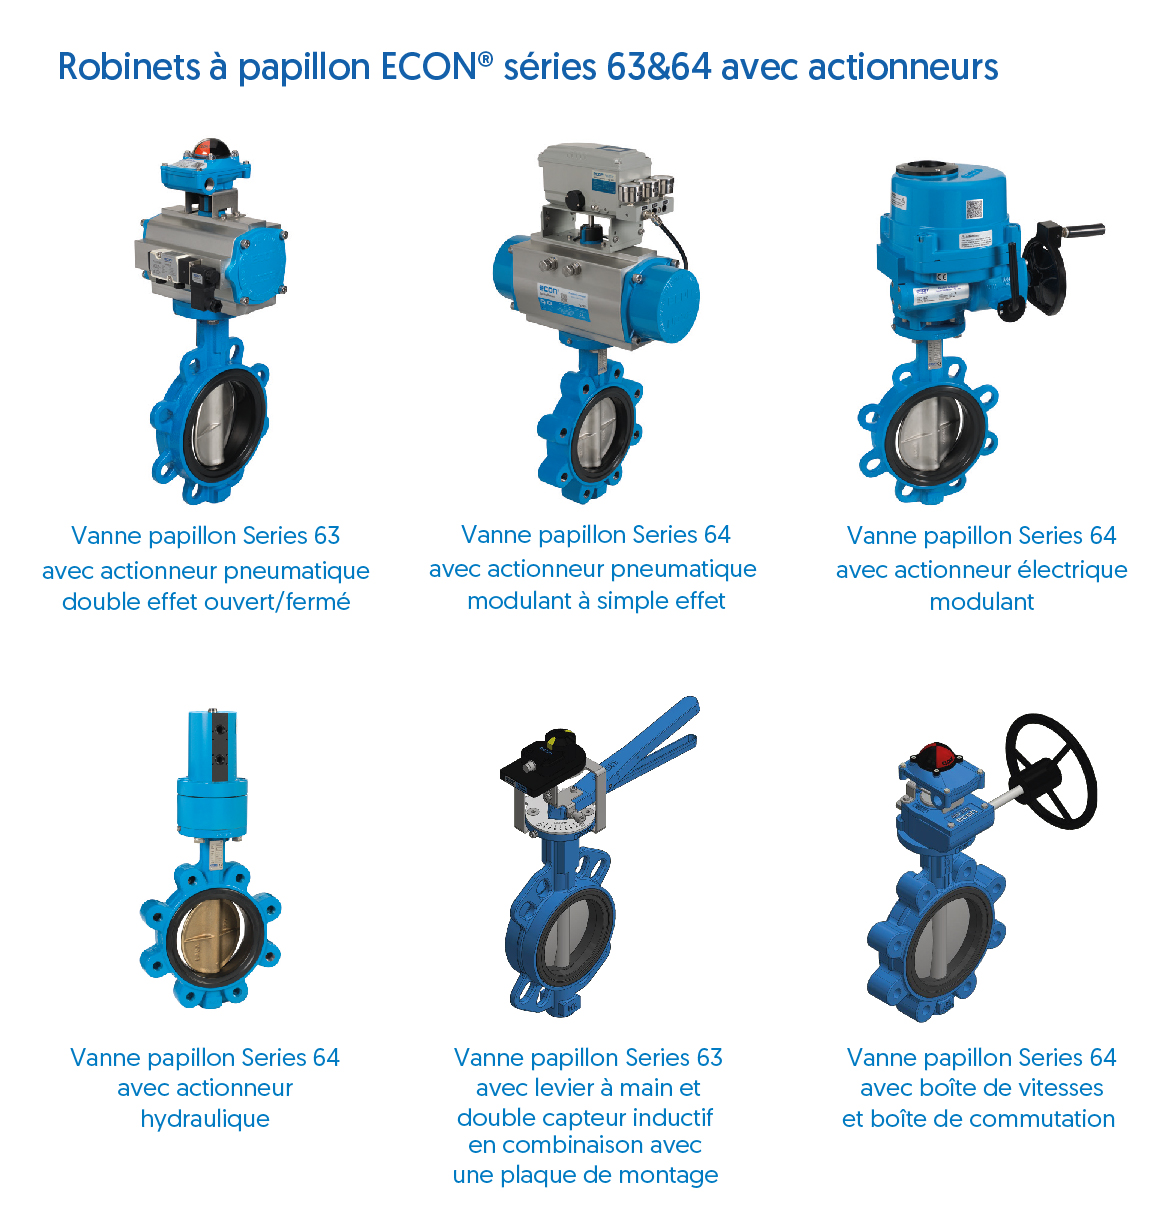 econ butterfly valves series 63 and 64 - actionneurs